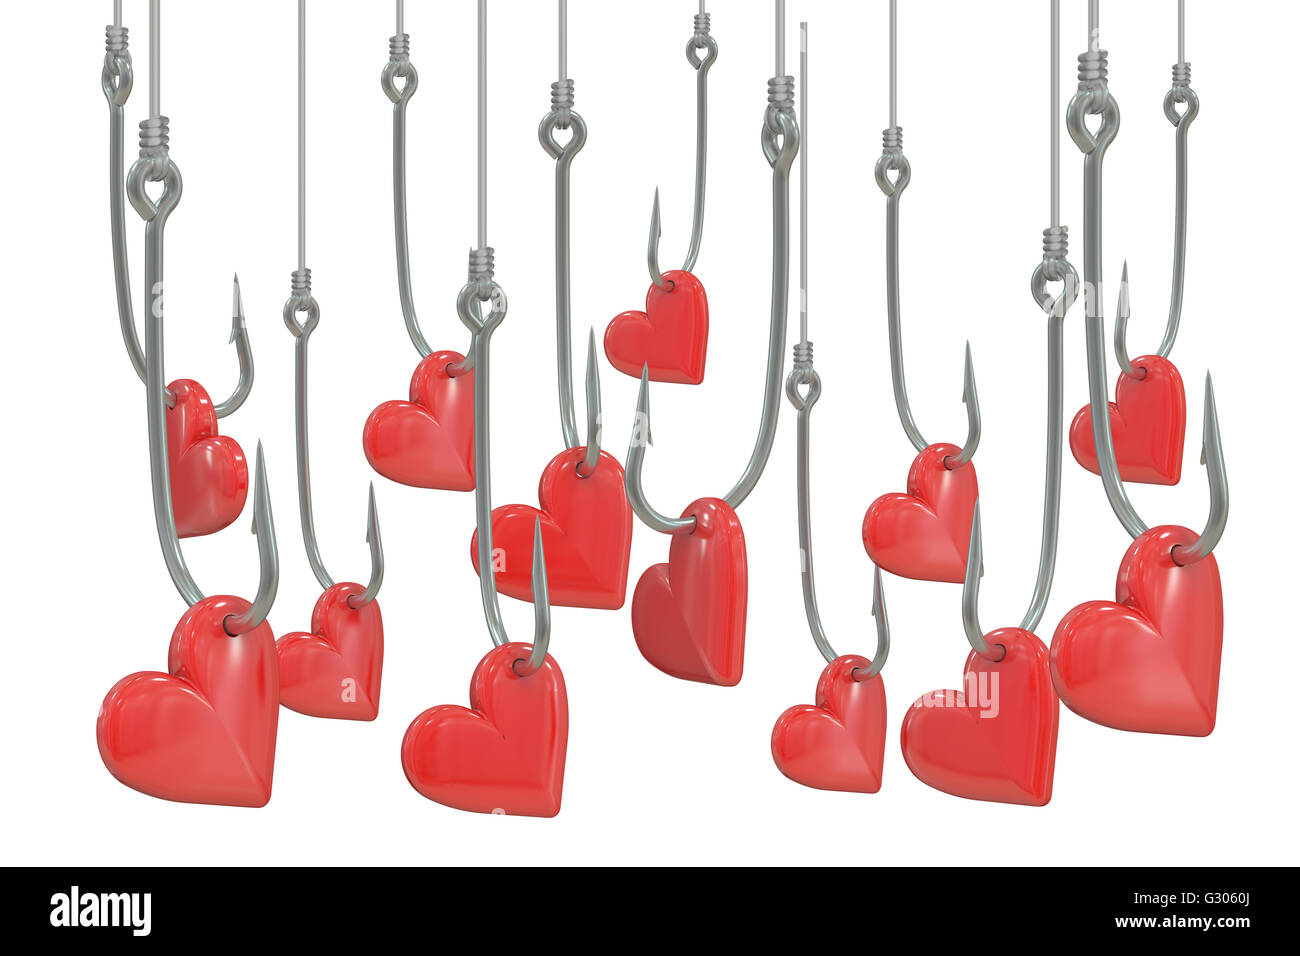 Red hearts on the fishing hooks, 3D rendering on white background Stock Photo